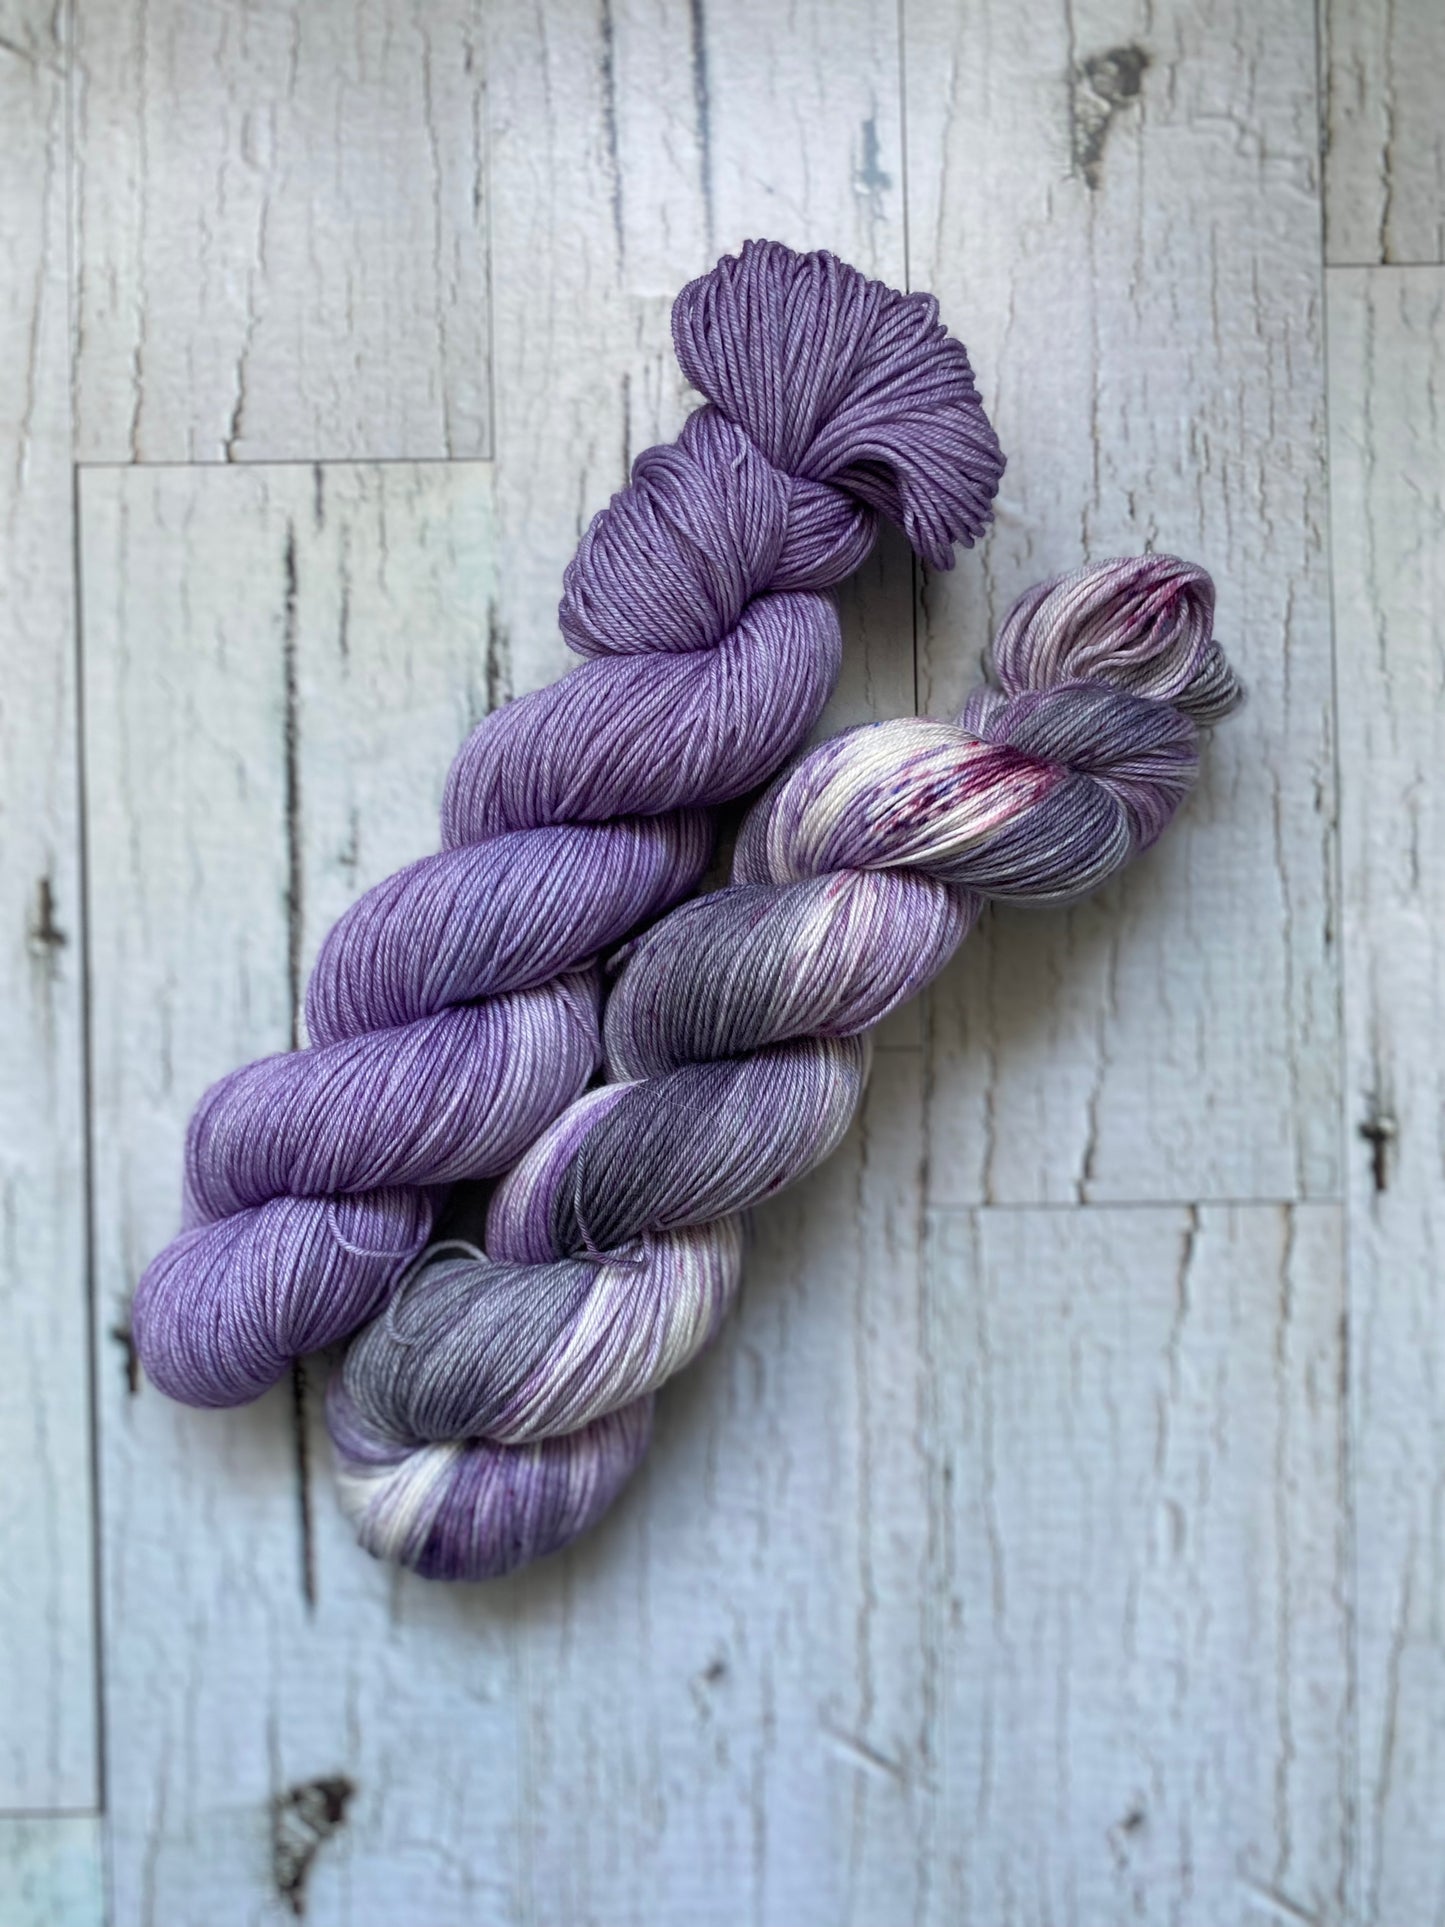 Two Skeins of Everyday Fingeringing, Wildflower on the left and Lilac Storm on the Right.